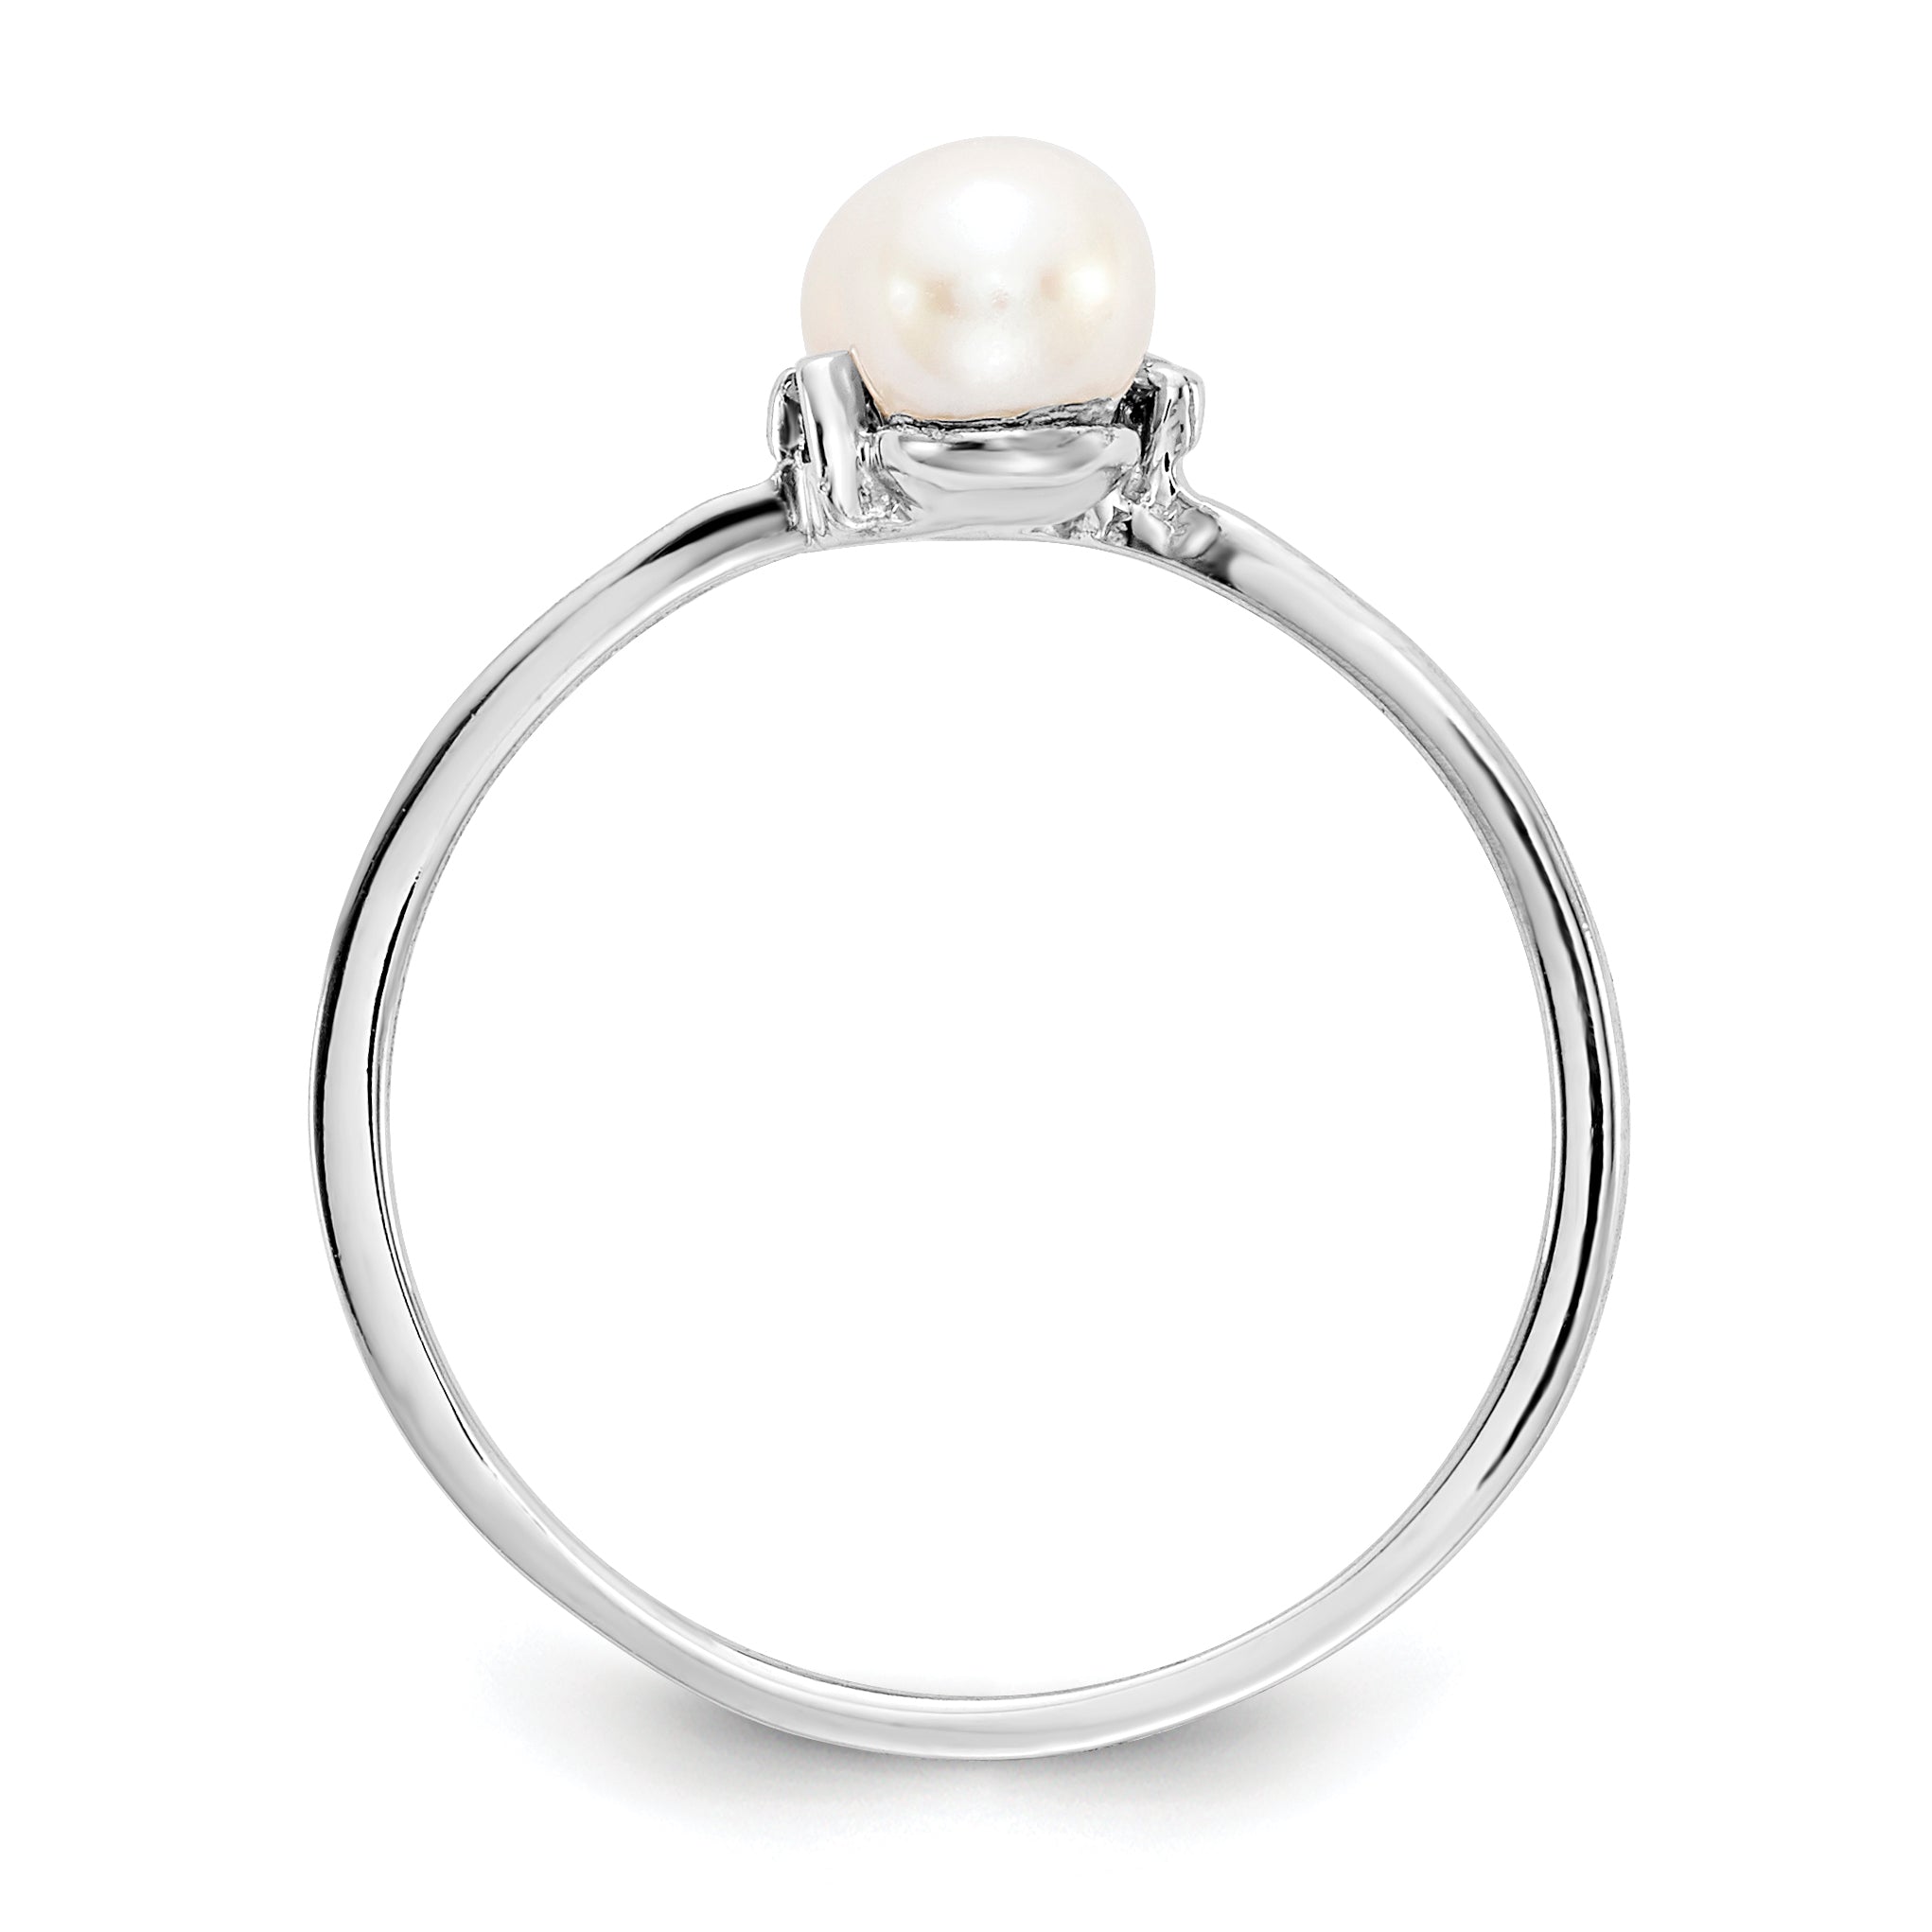 14K White Gold 4mm FW Cultured Pearl A Diamond ring